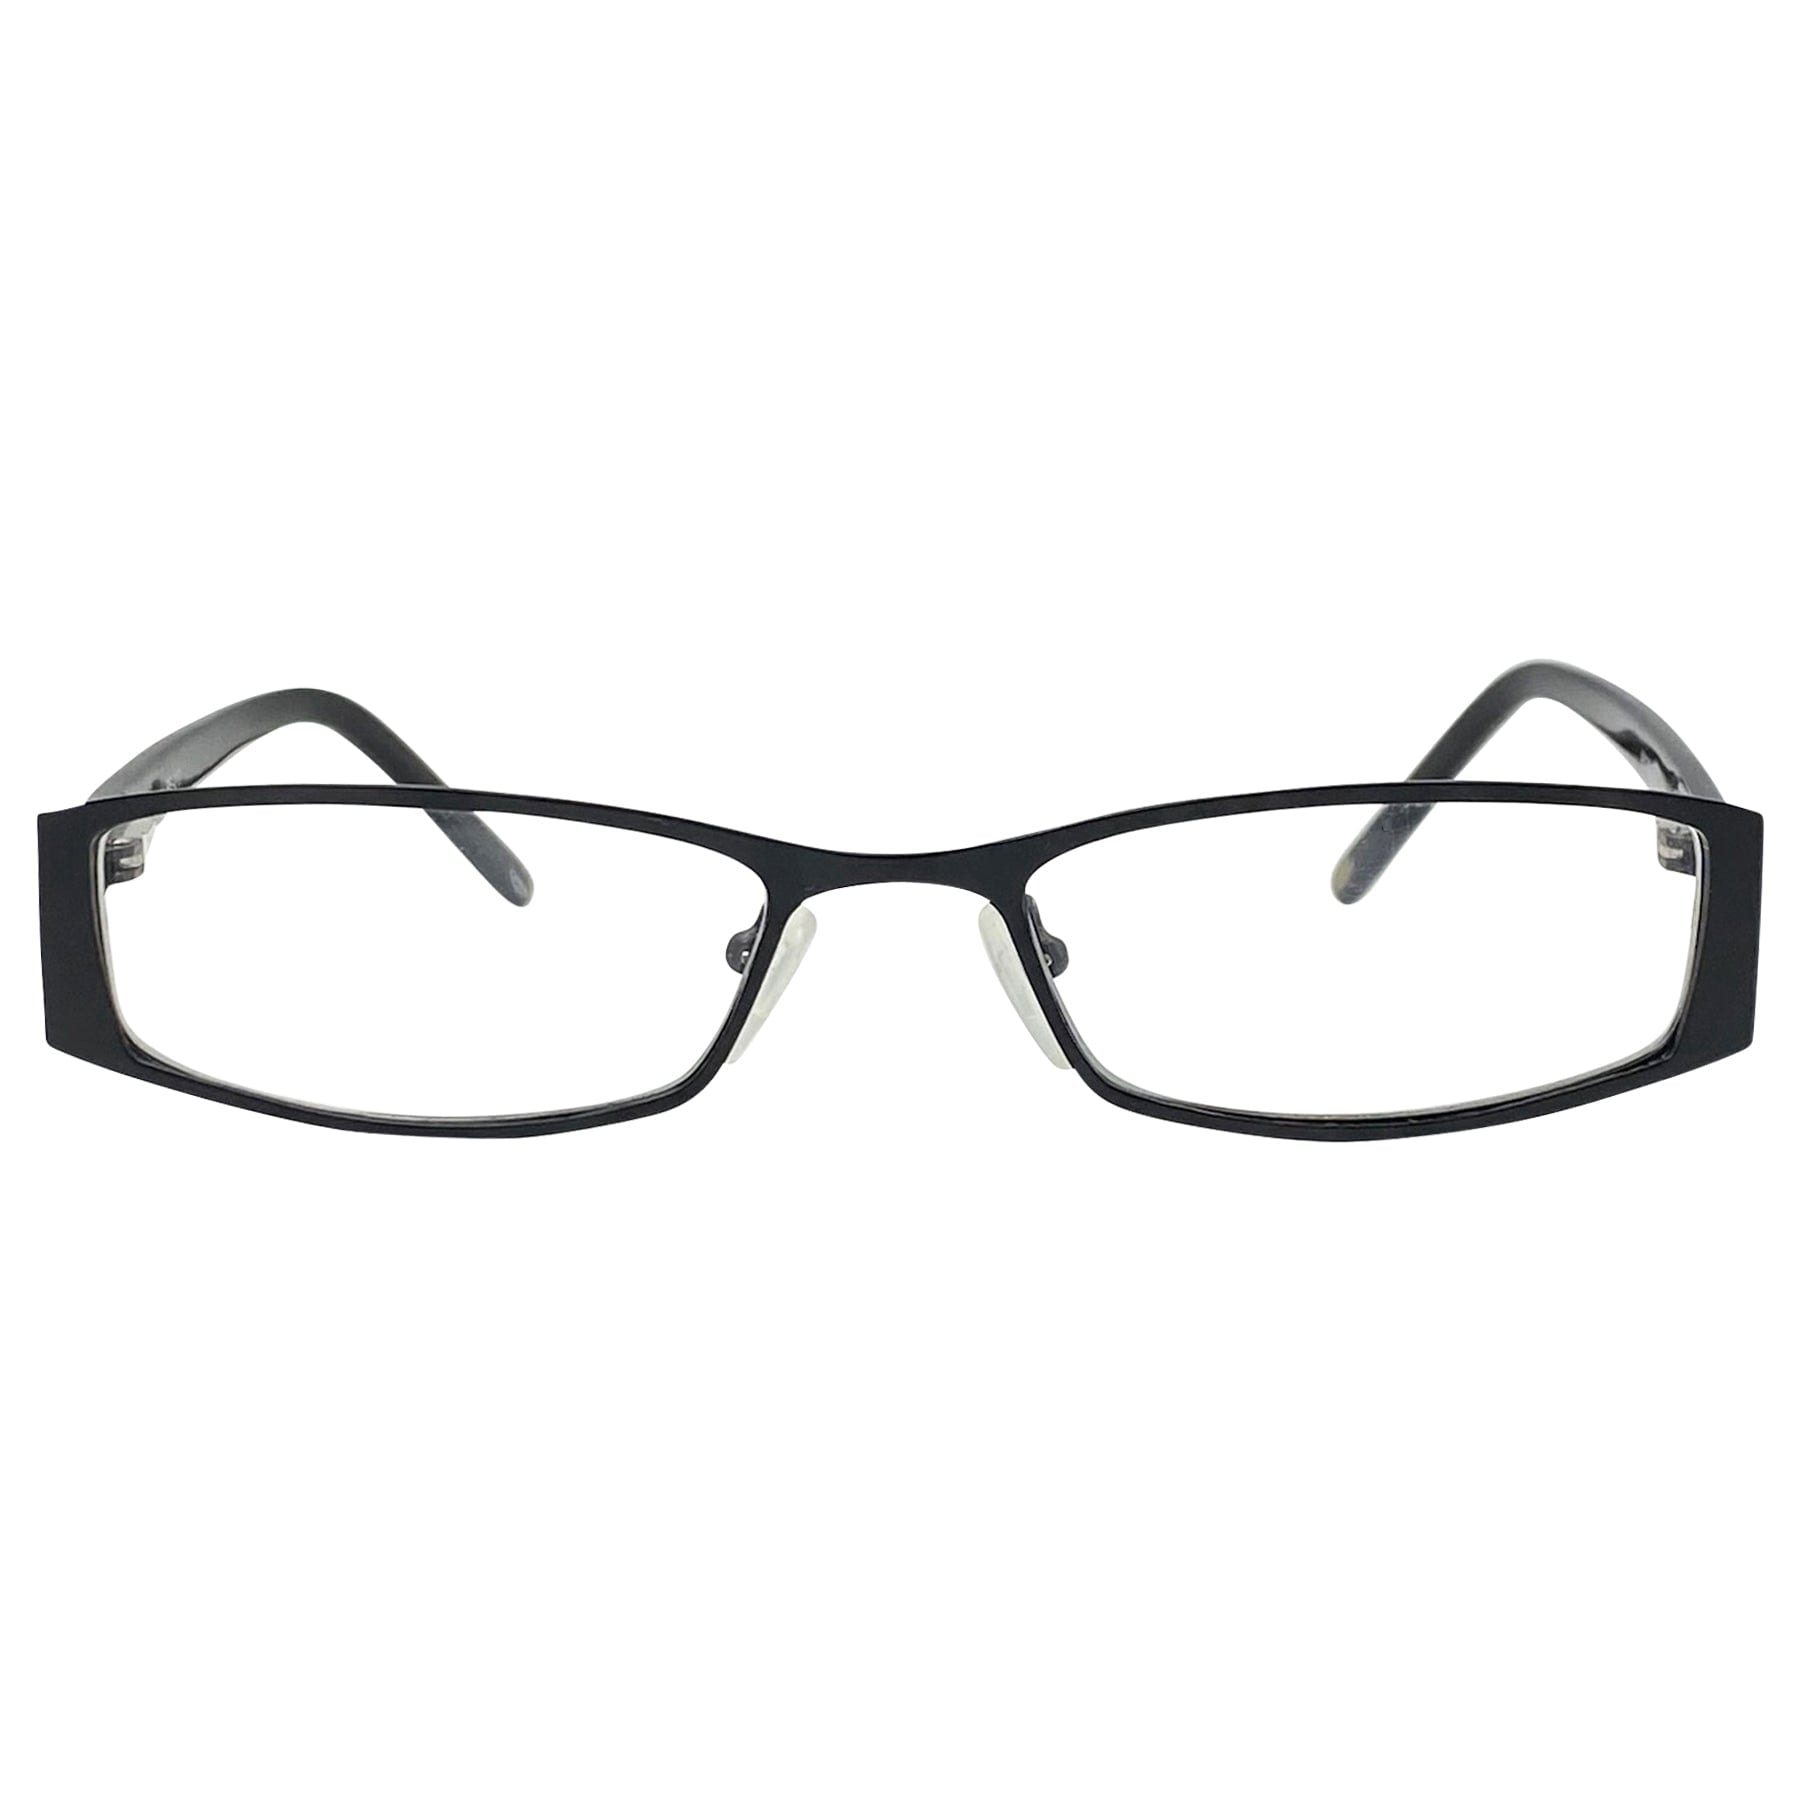 all black glasses with a matte metal finish frame and clear lens